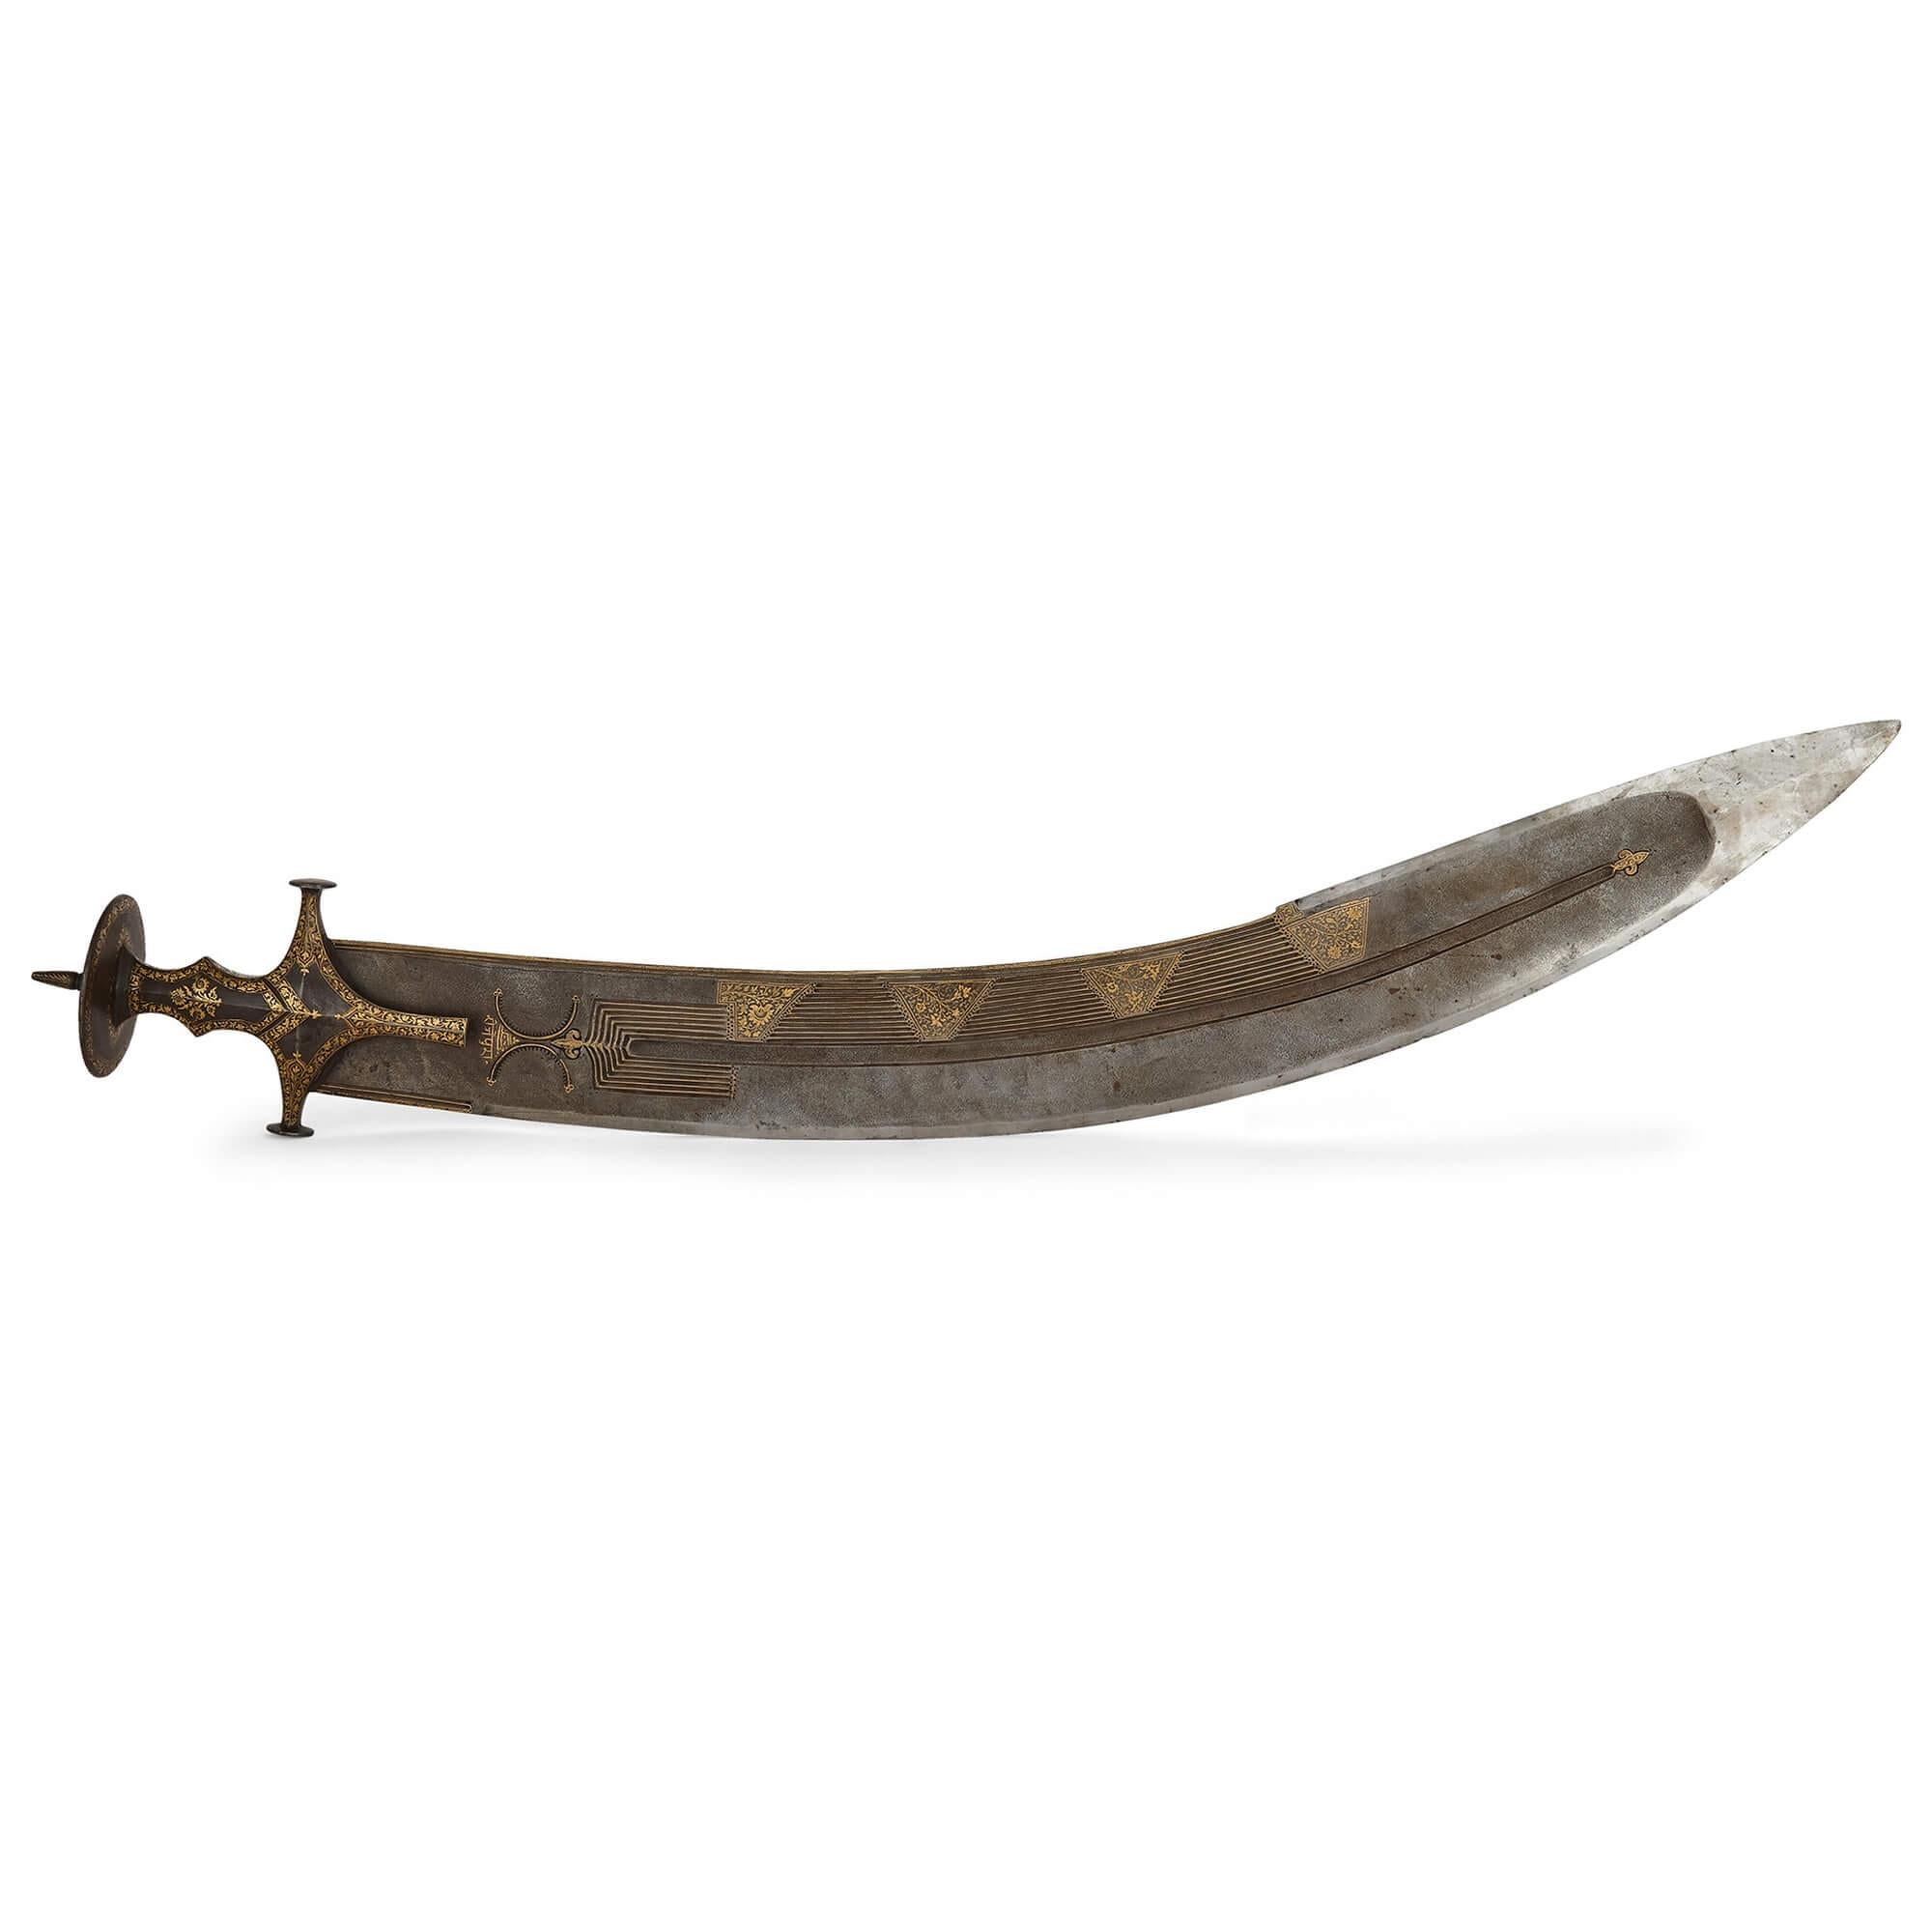 Large Indian gold damascened steel tegha sword.
Indian, c. 1850
Length 112cm, width 16cm, depth 10cm

This remarkable sword is a tegha, a large Indian sword designed to be used in a ceremonial manner. The curved blade of the sword features a